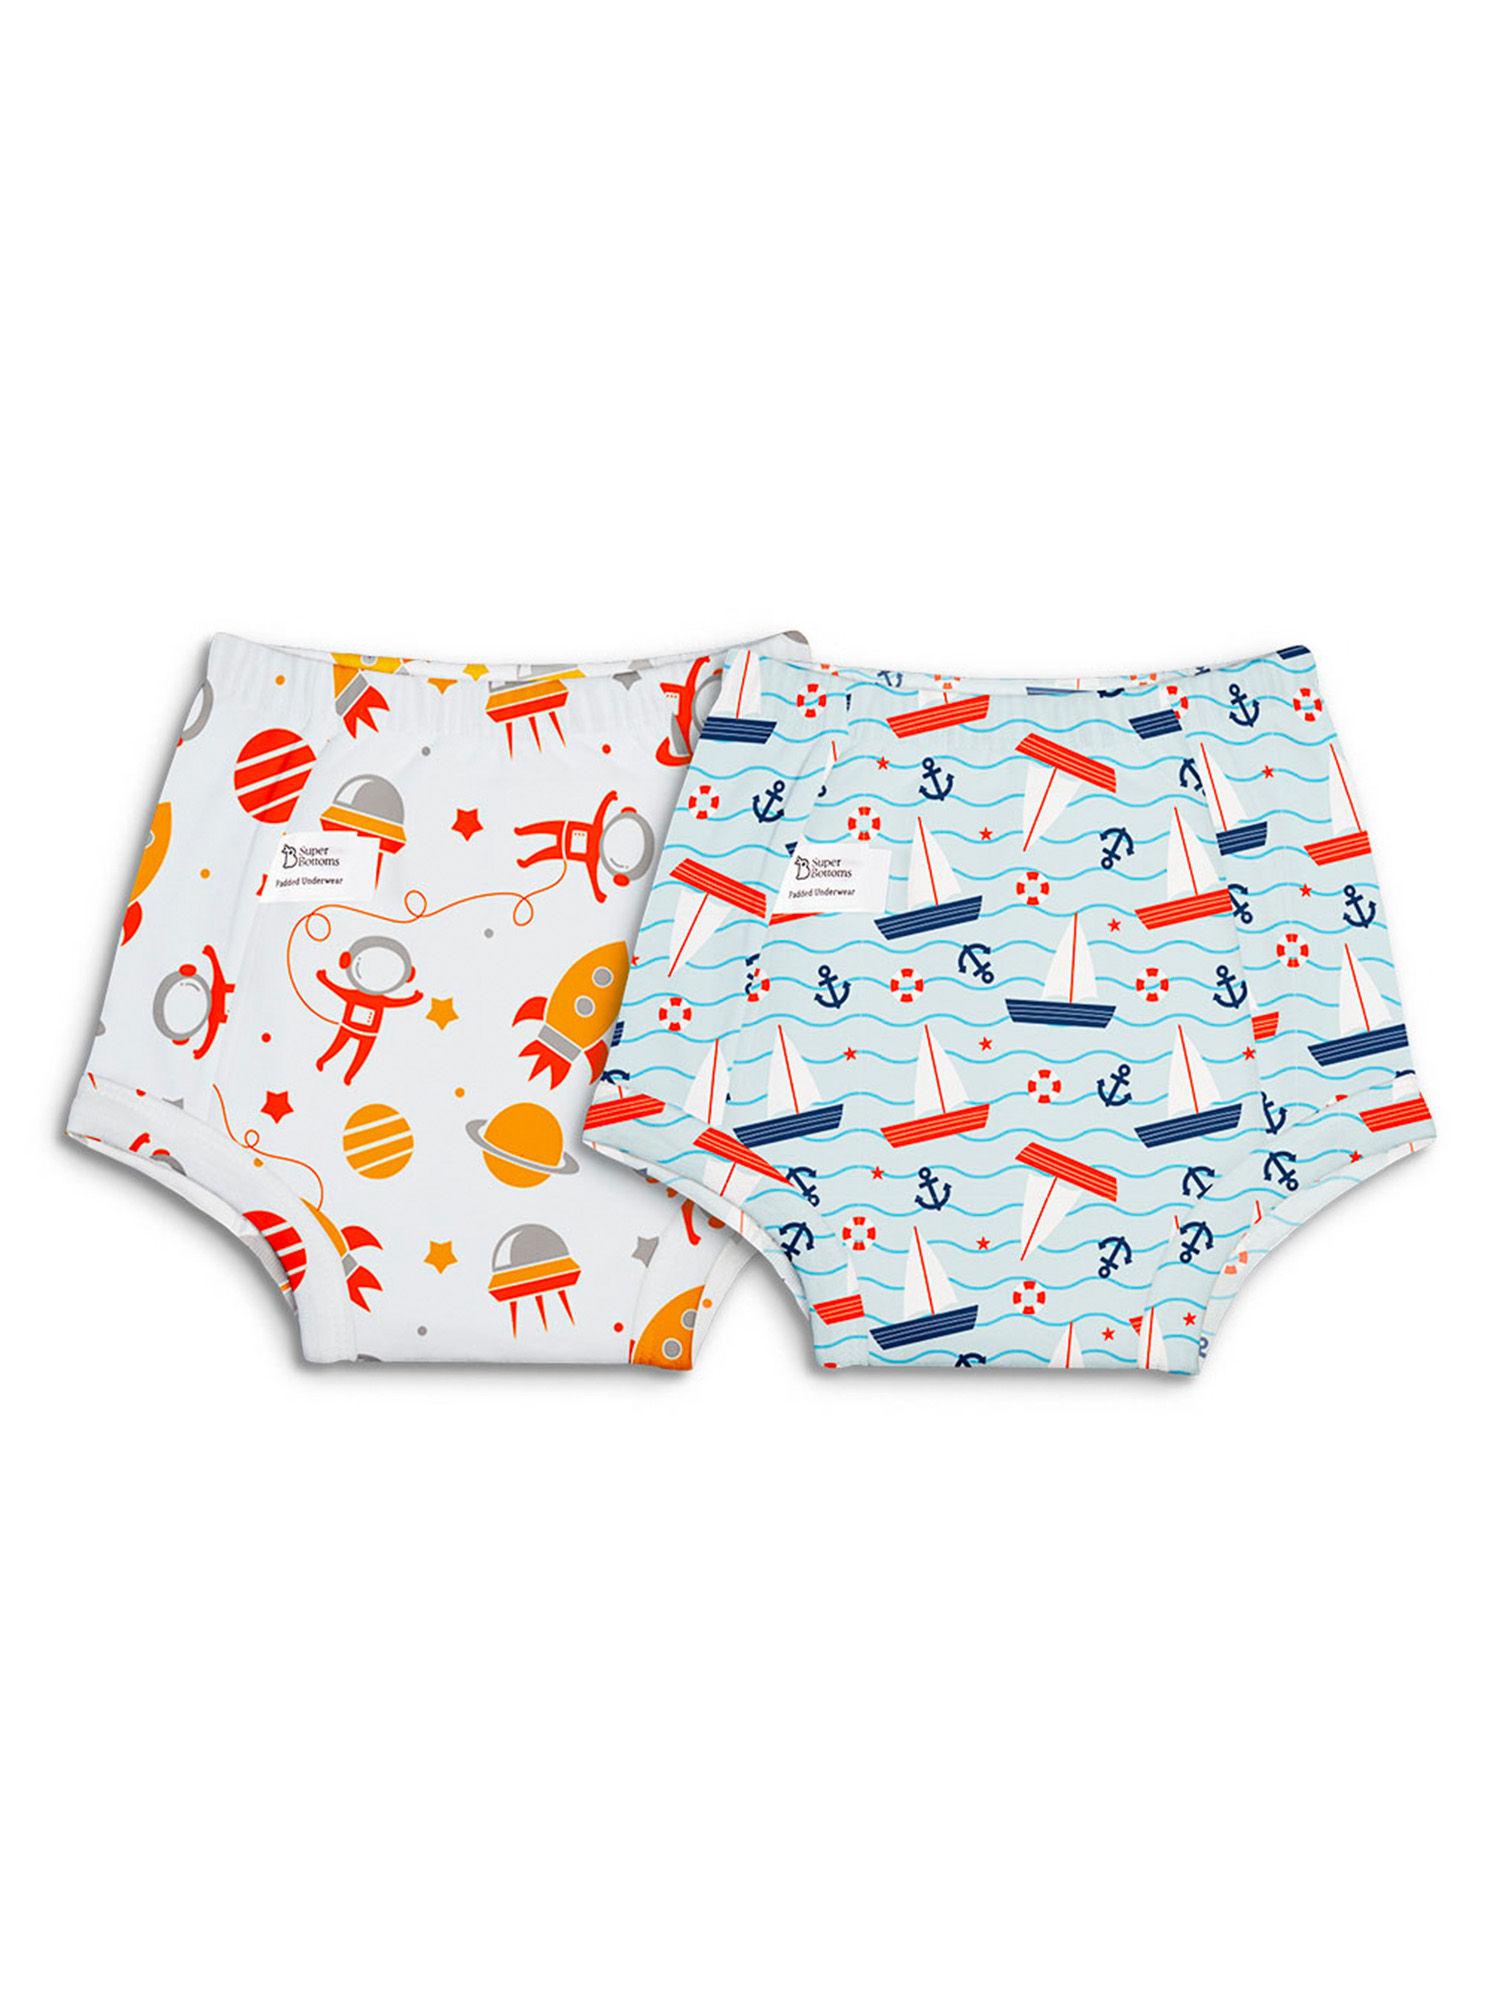 padded potty training unisex underwear need space-sea you (pack of 2)